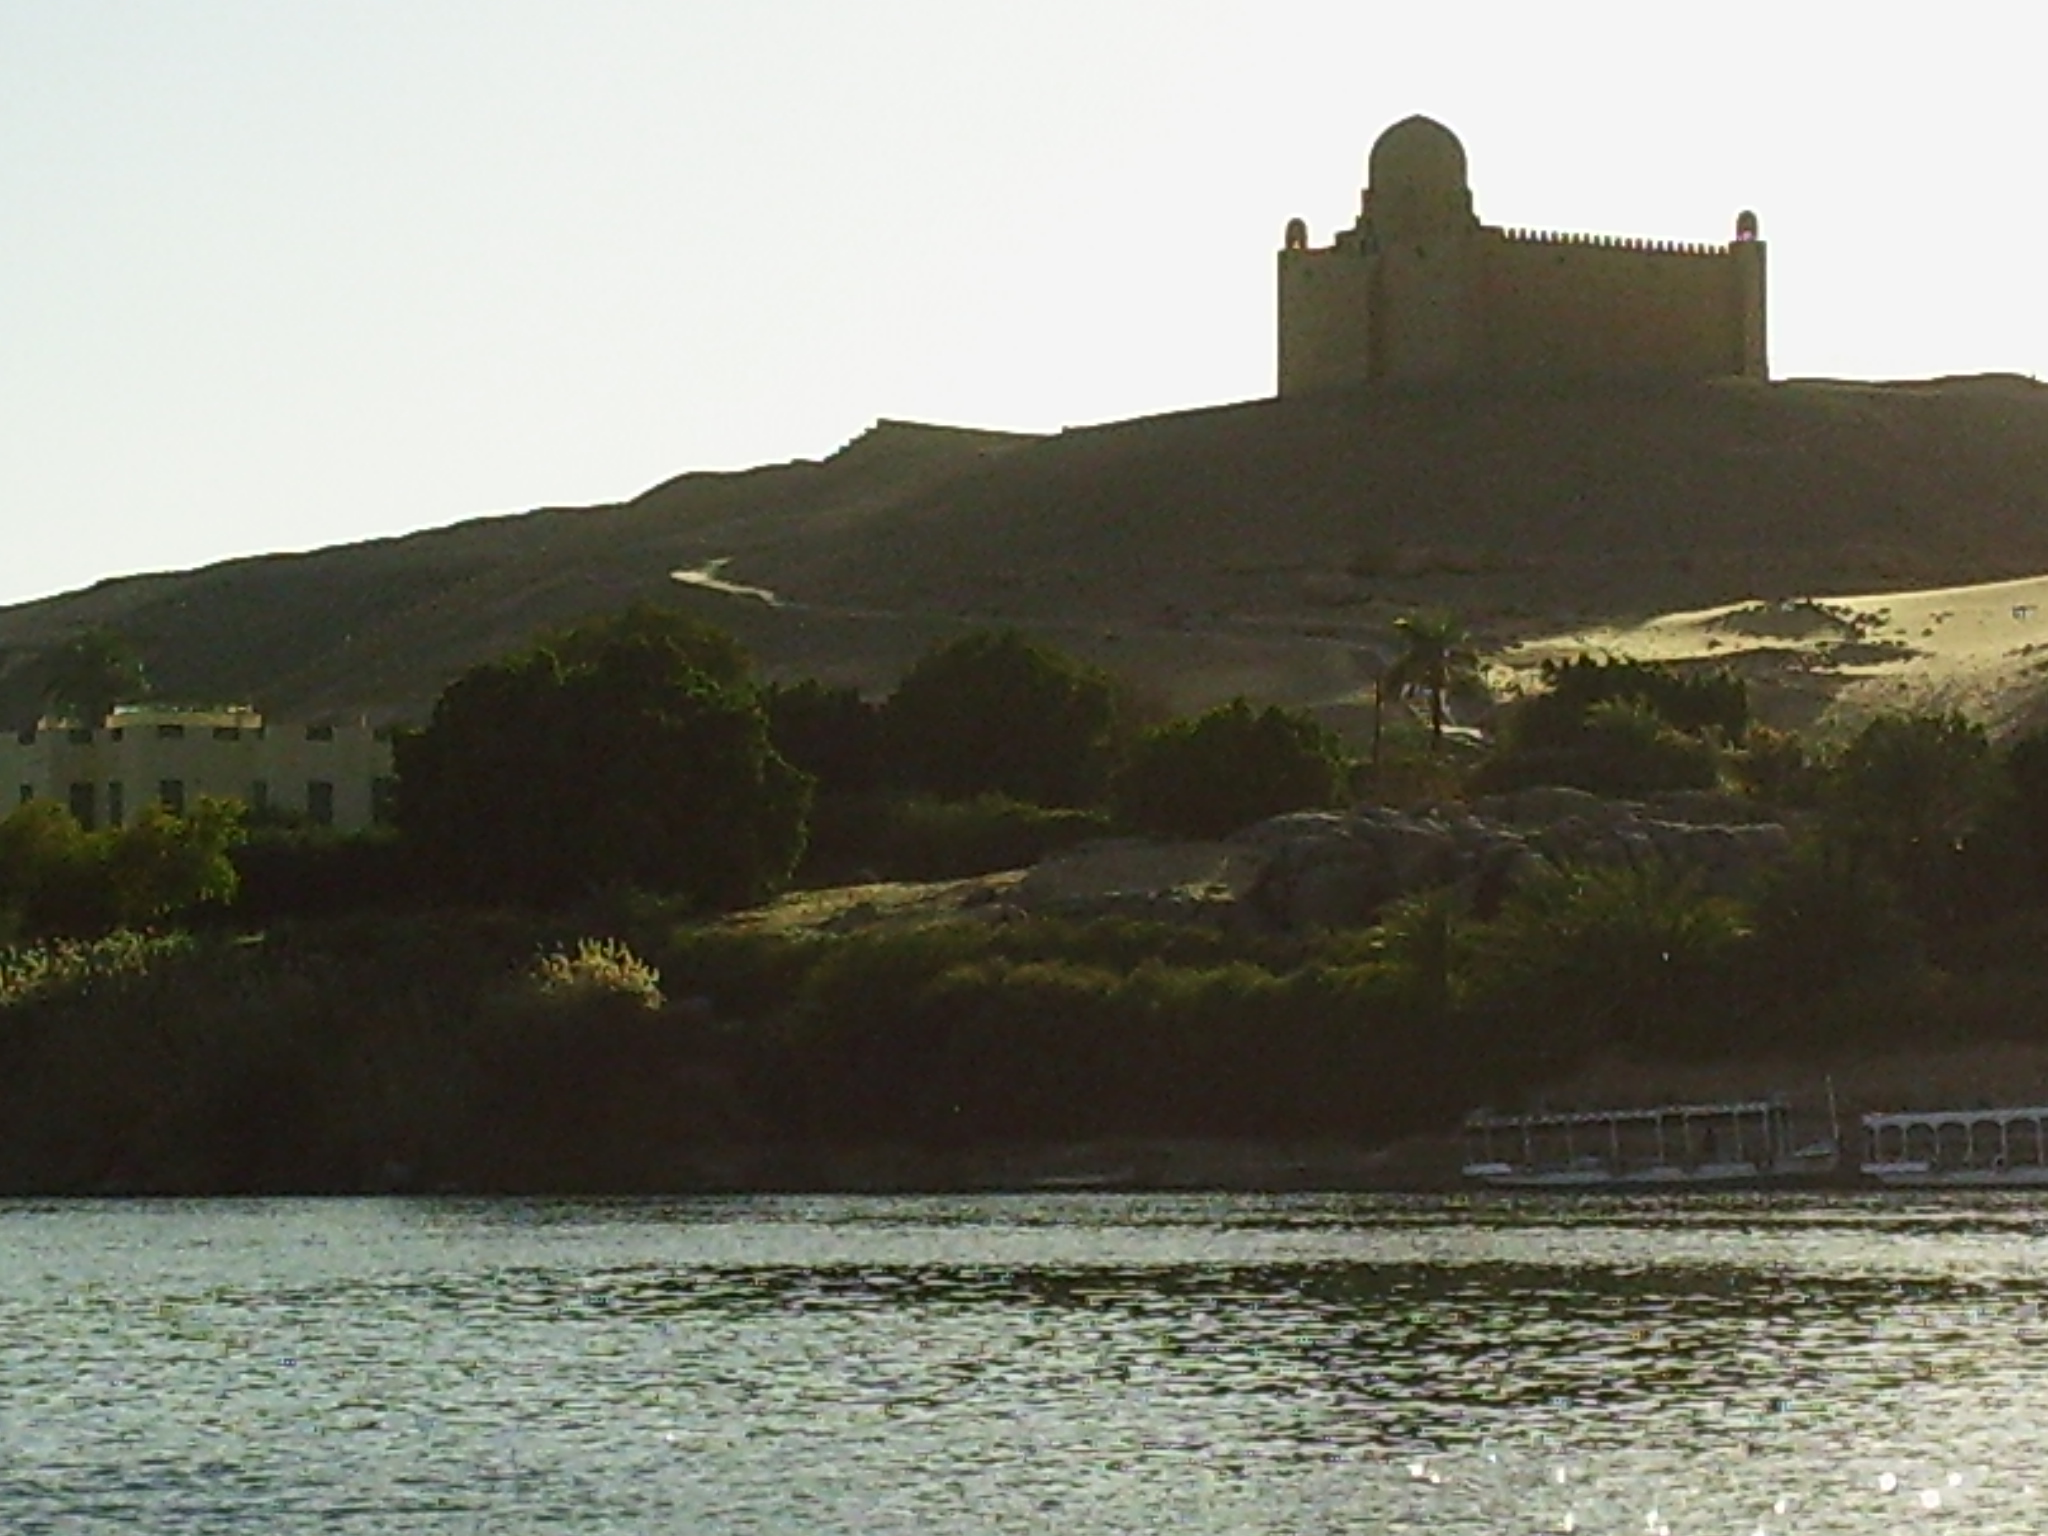  Mausoleum of the Aga Khan in the desert on the banks of the Nile 